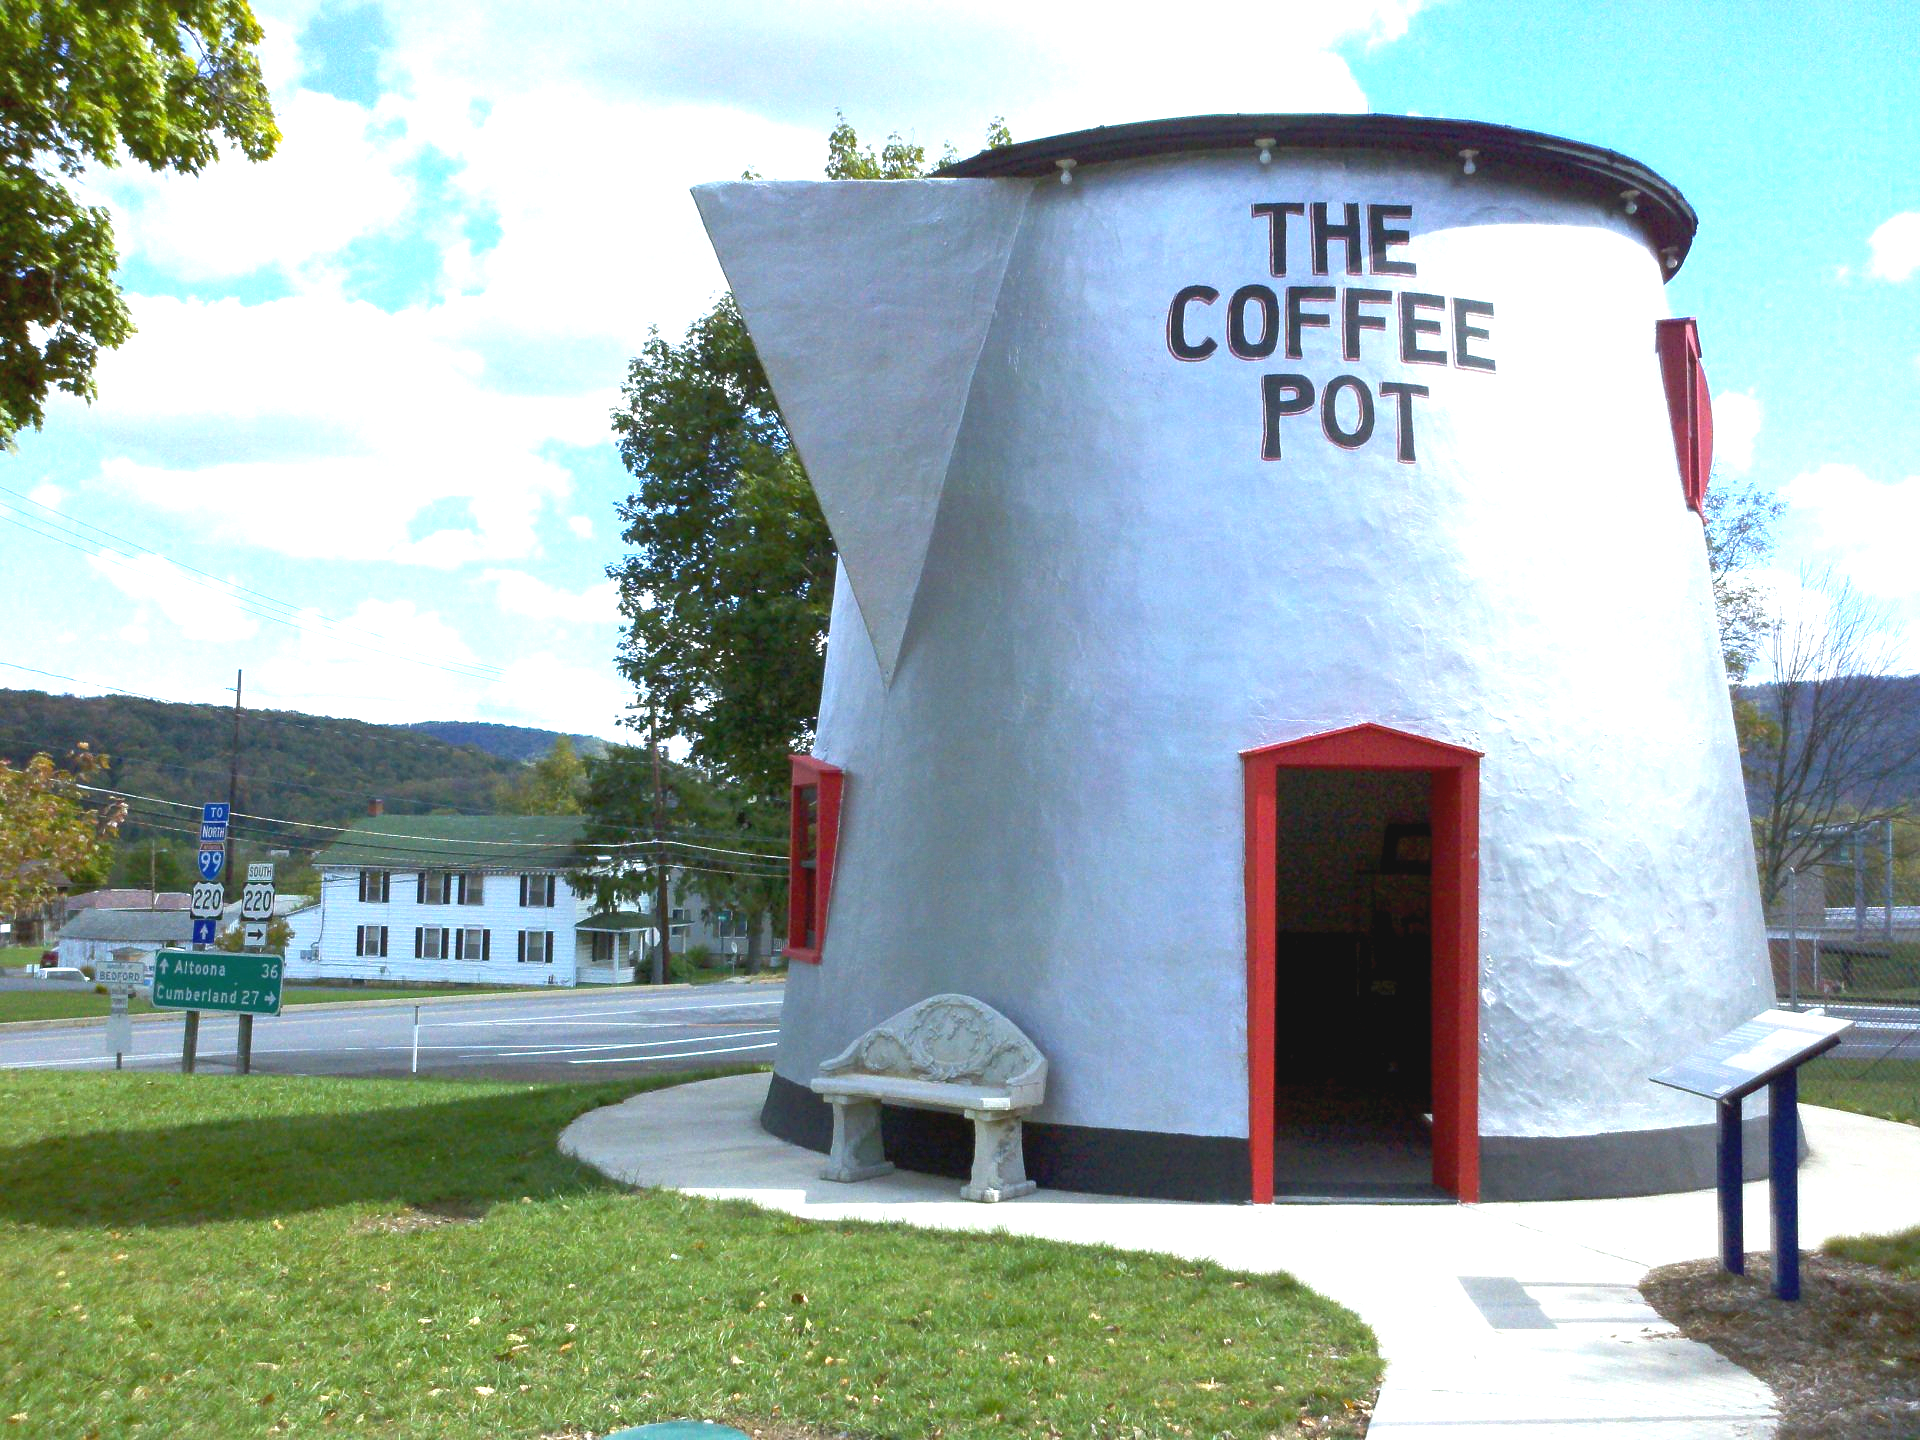 Largest Coffee Pot: The Koontz Coffee Pot in Bedford sets world record